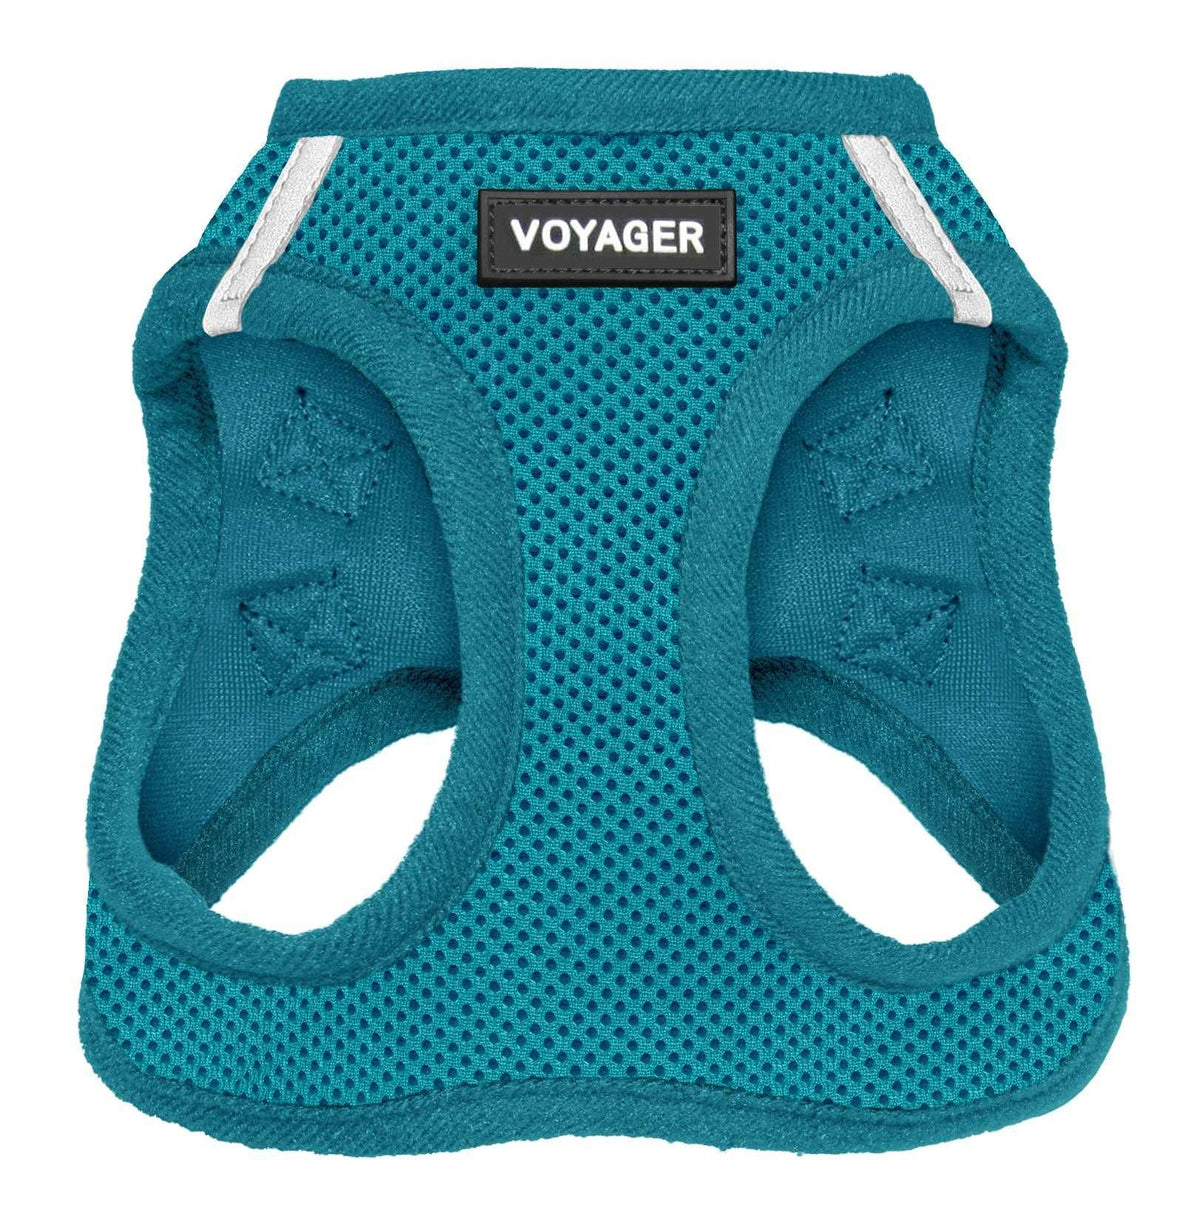 VOYAGER Step-In Air Pet Harness in Turquoise with Matching Trim and Webbing - Front